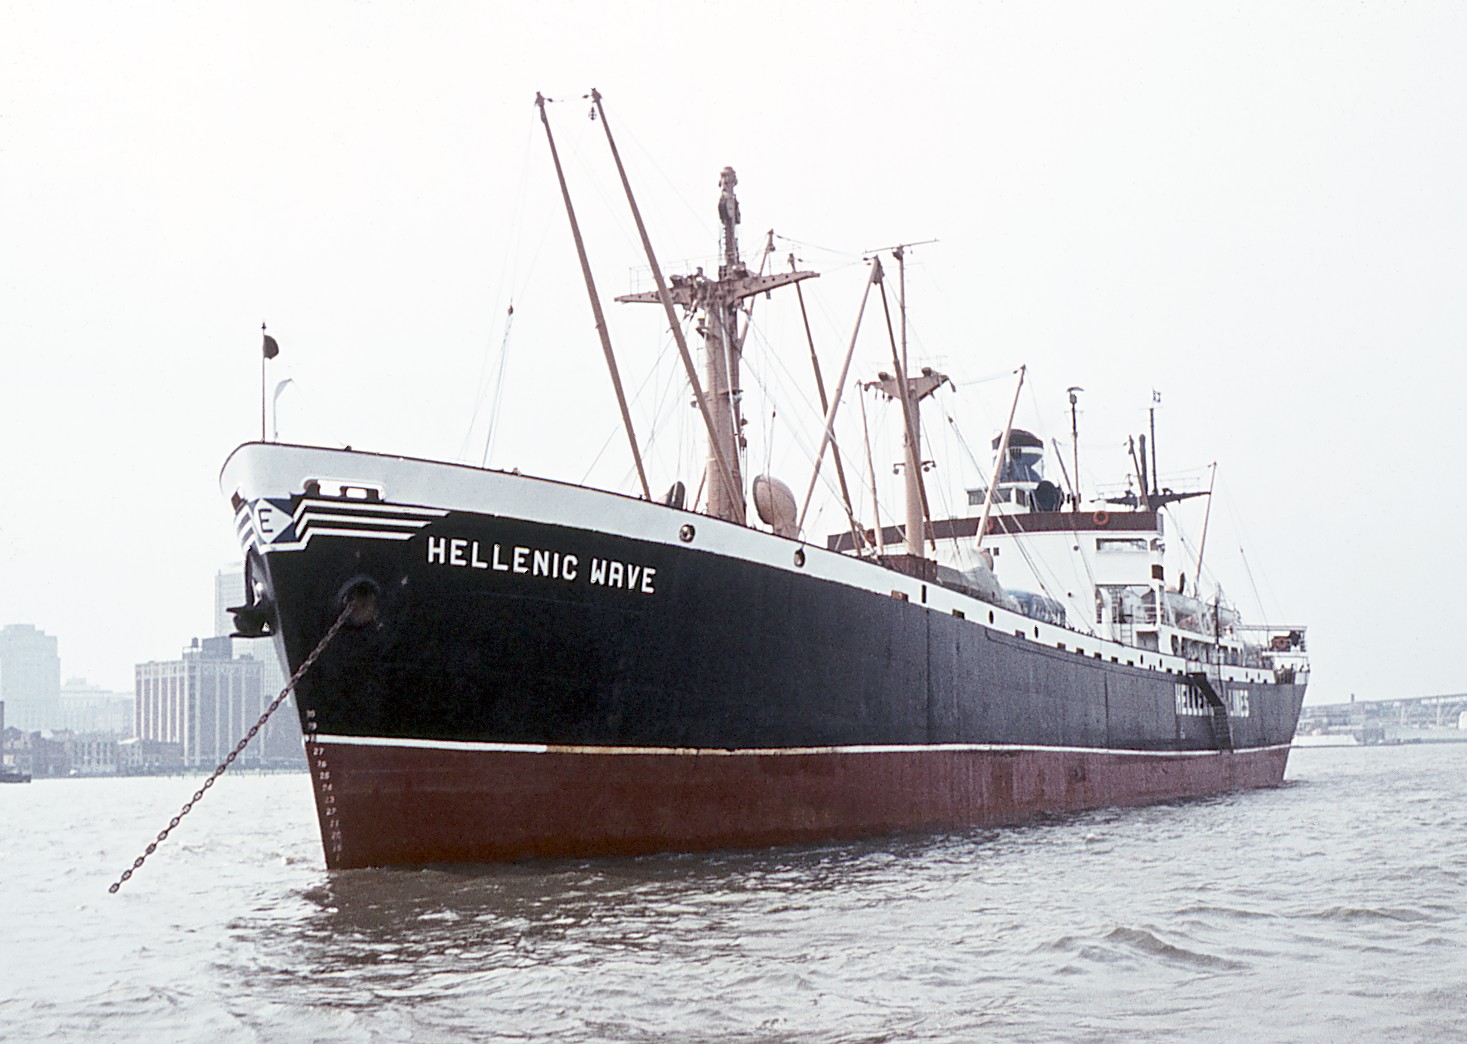 Ships build under the Merchant Marine Act of 1936